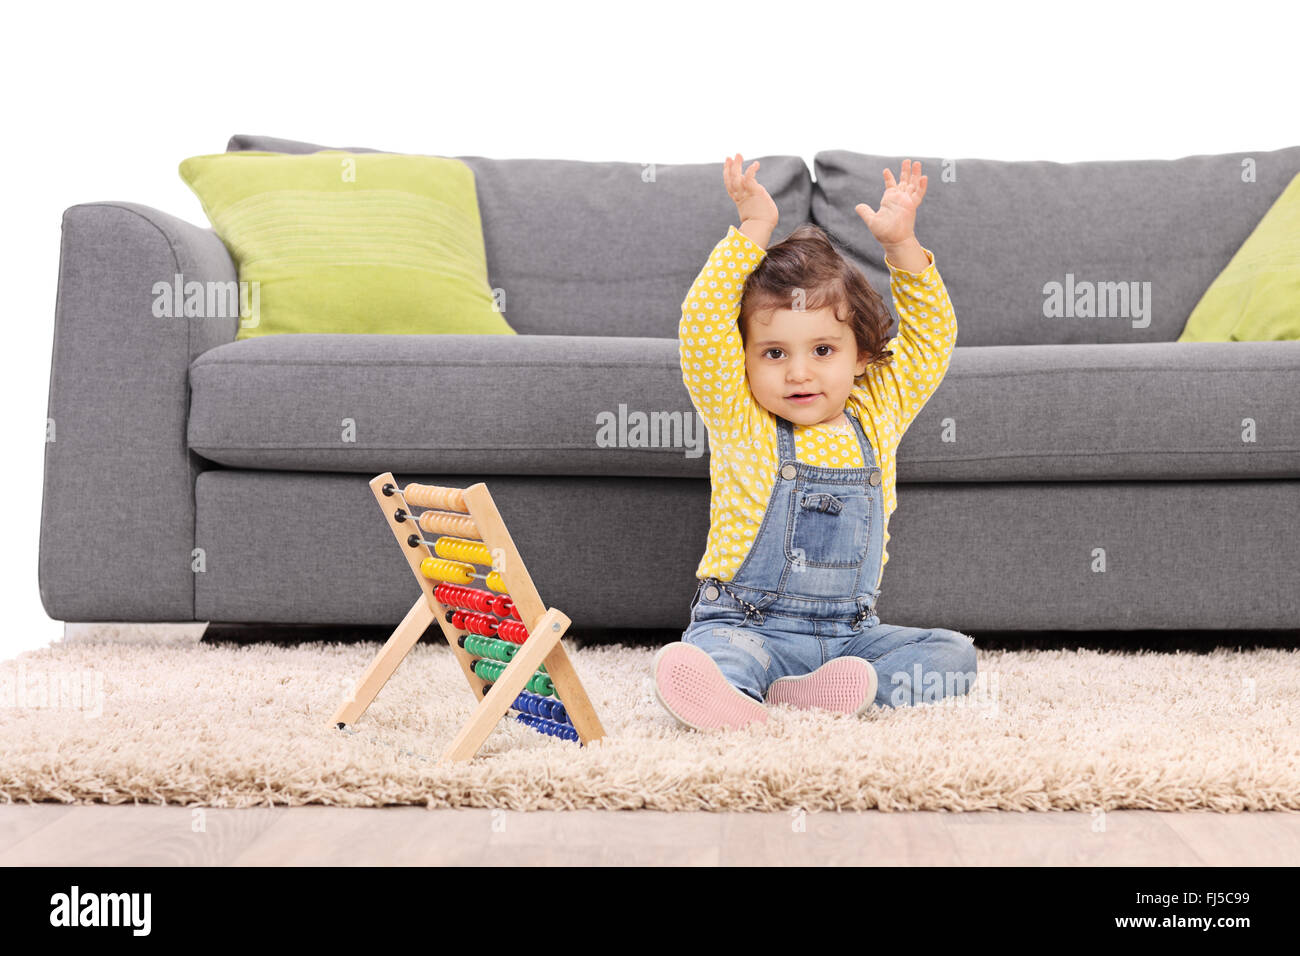 Baby girl sitting on floor in front of a gray sofa and gesturing with her hands with an abacus next to her Stock Photo